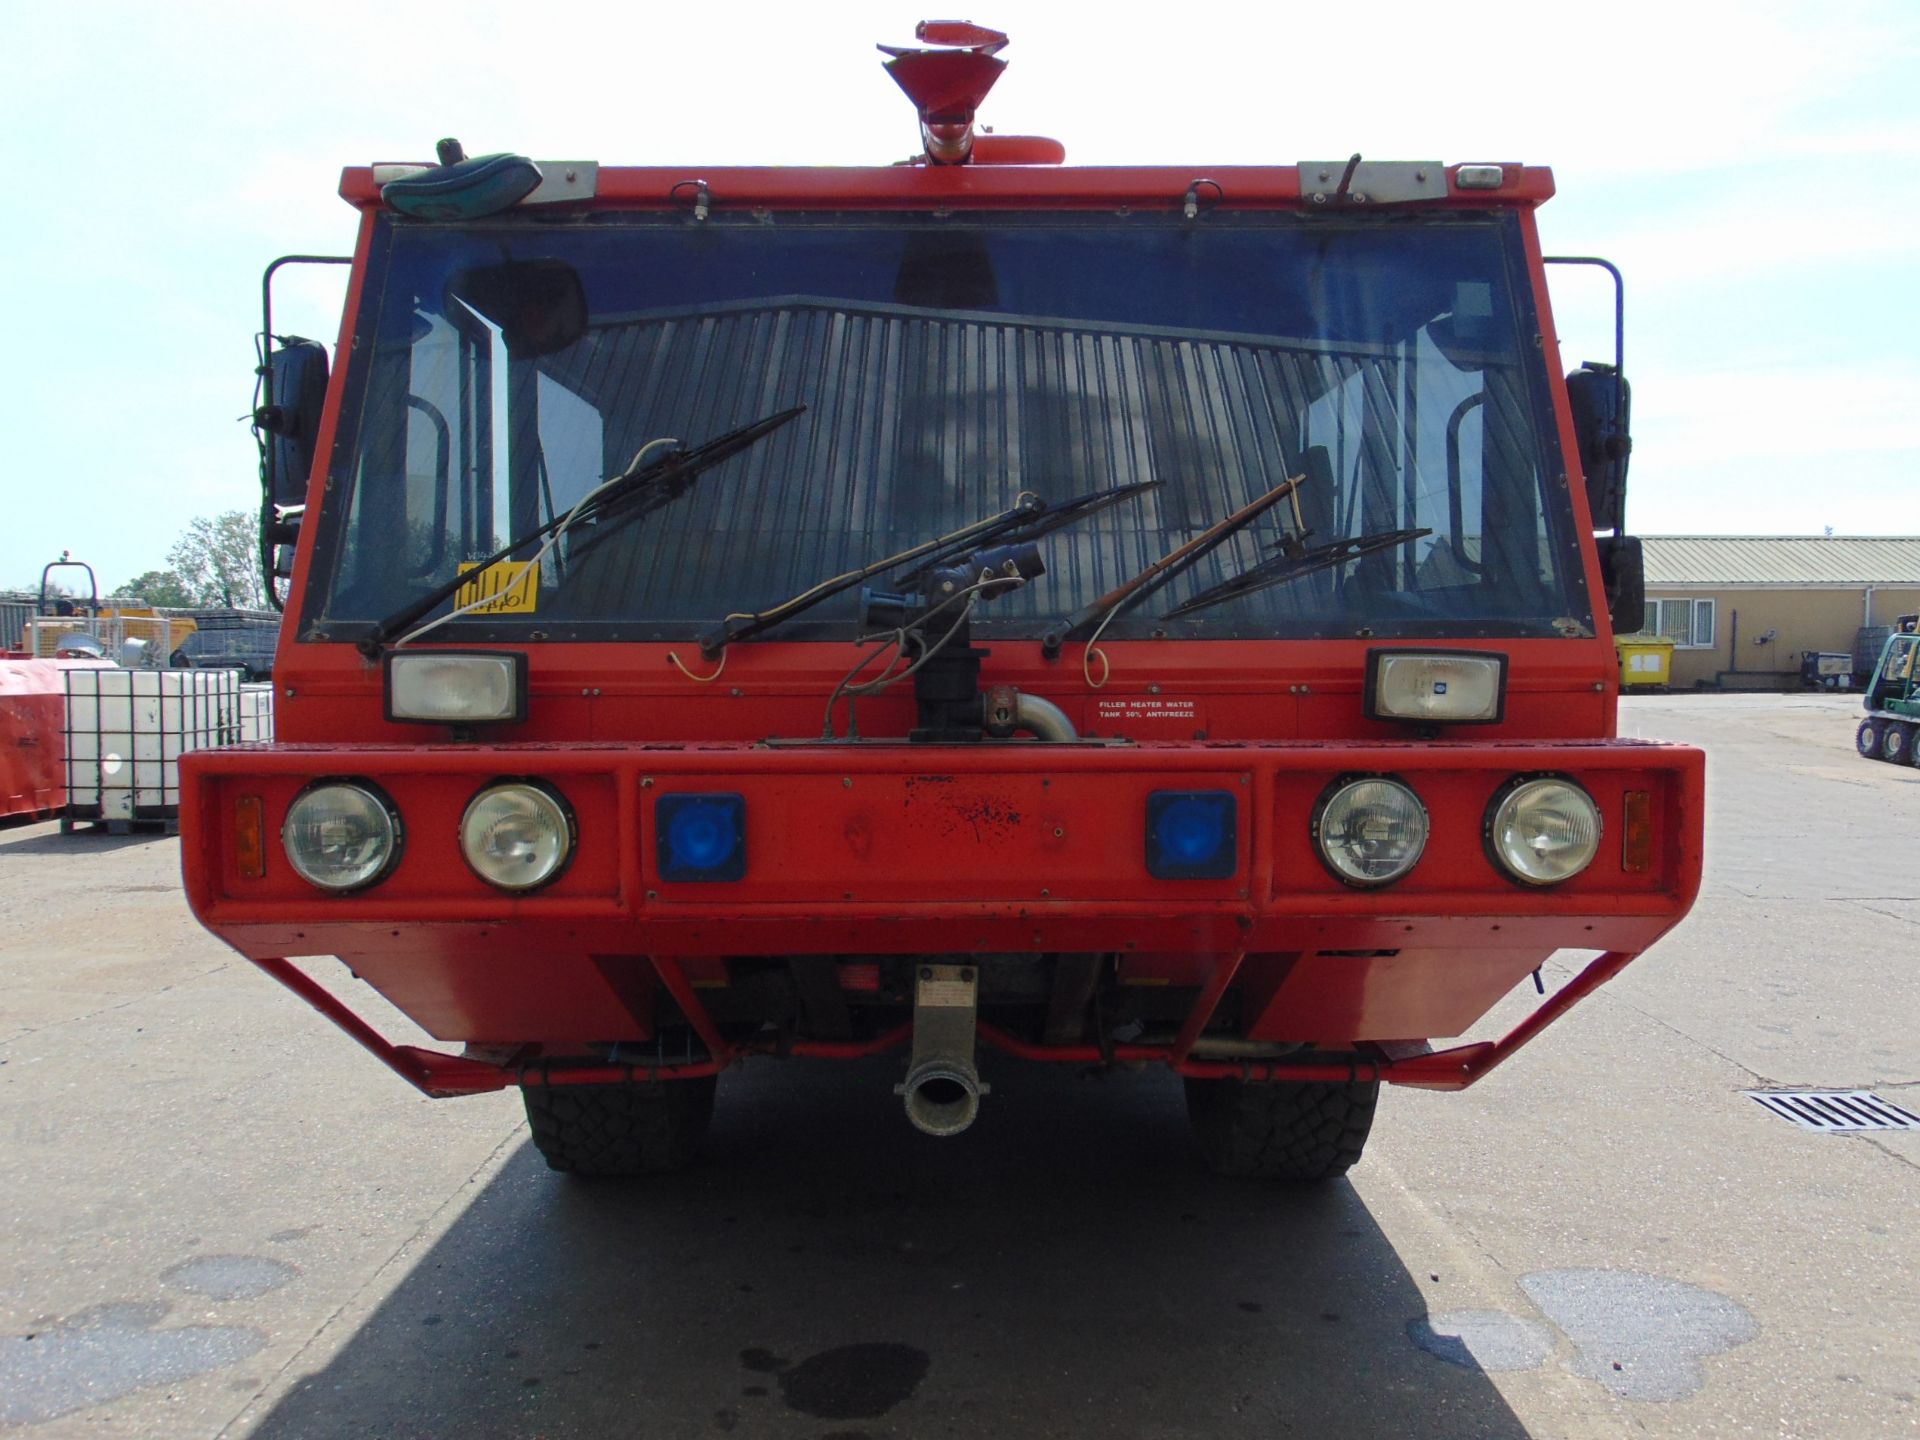 Unipower 4 x 4 Airport Fire Fighting Appliance - Rapid Intervention Vehicle - Image 5 of 73